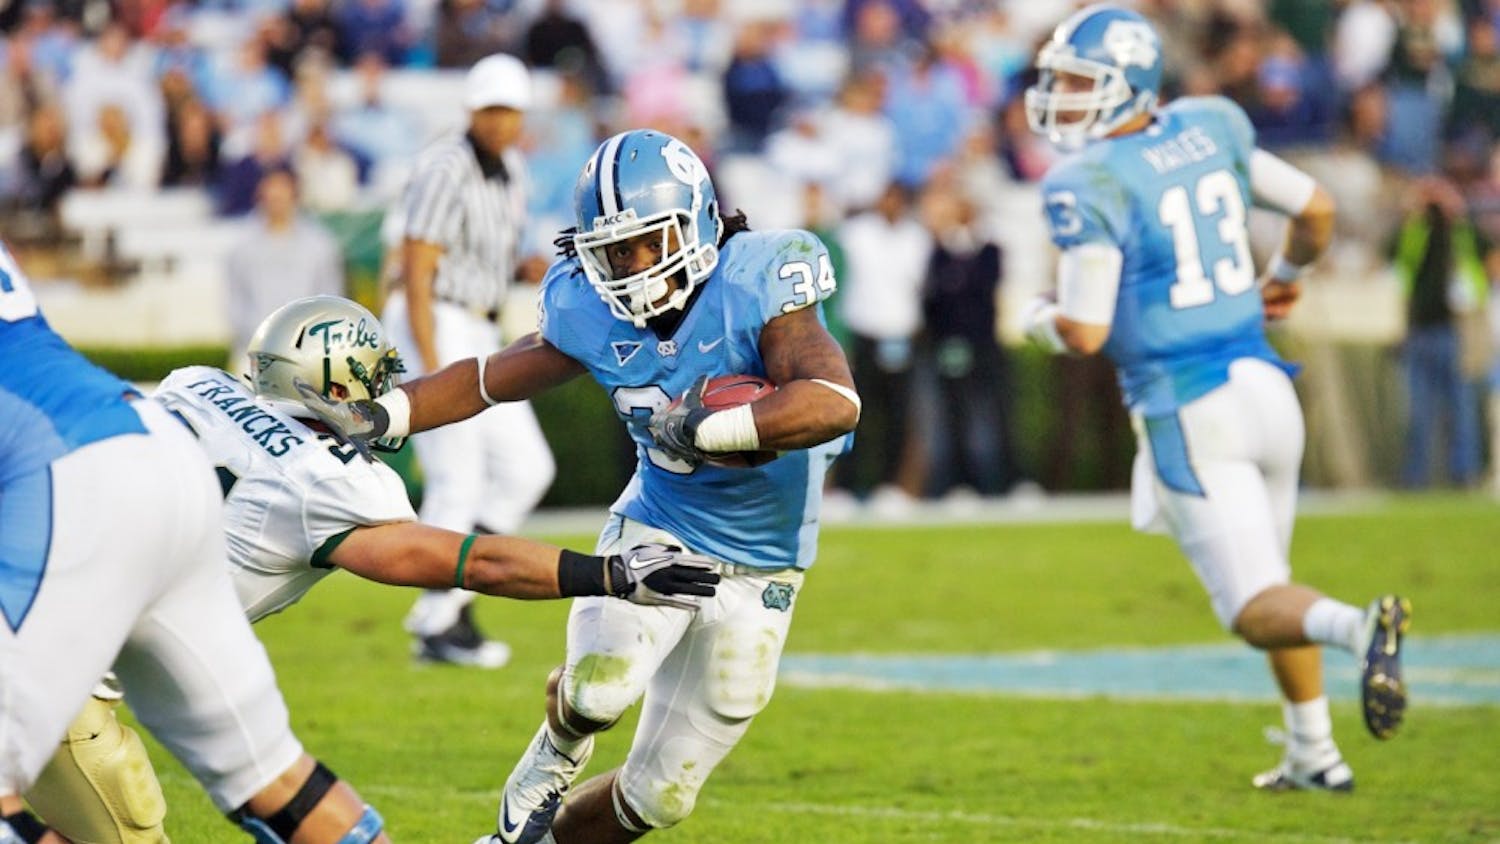 Johnny White led the Tar Heels comeback in the 4th quarter against William and Mary.